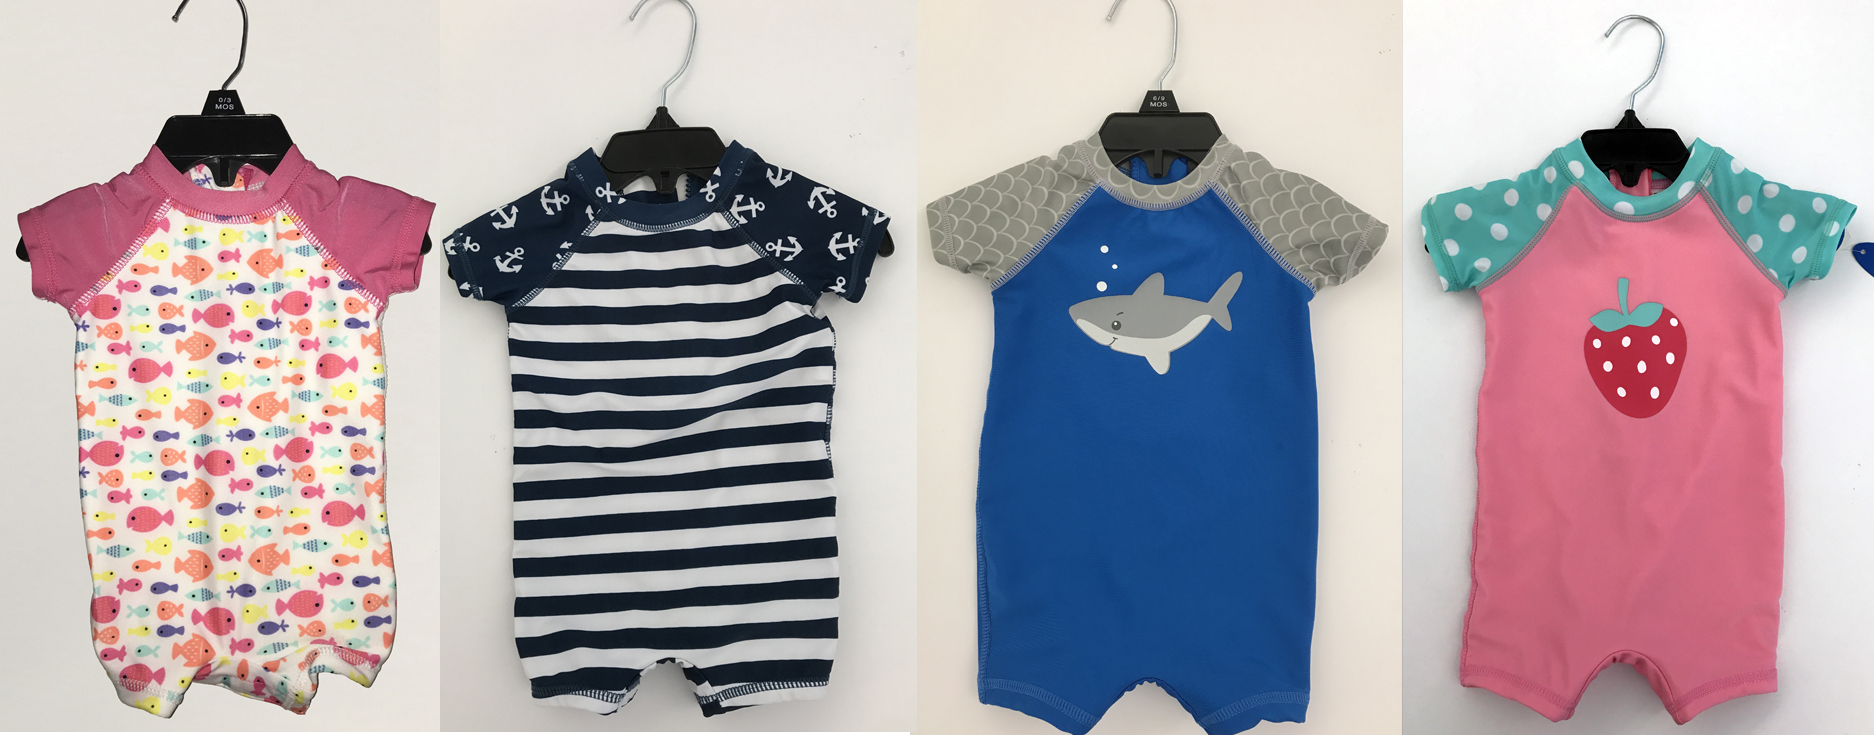 Swimsuits For Babies And Toddlers Sold At Meijer Recalled For Detaching Snaps